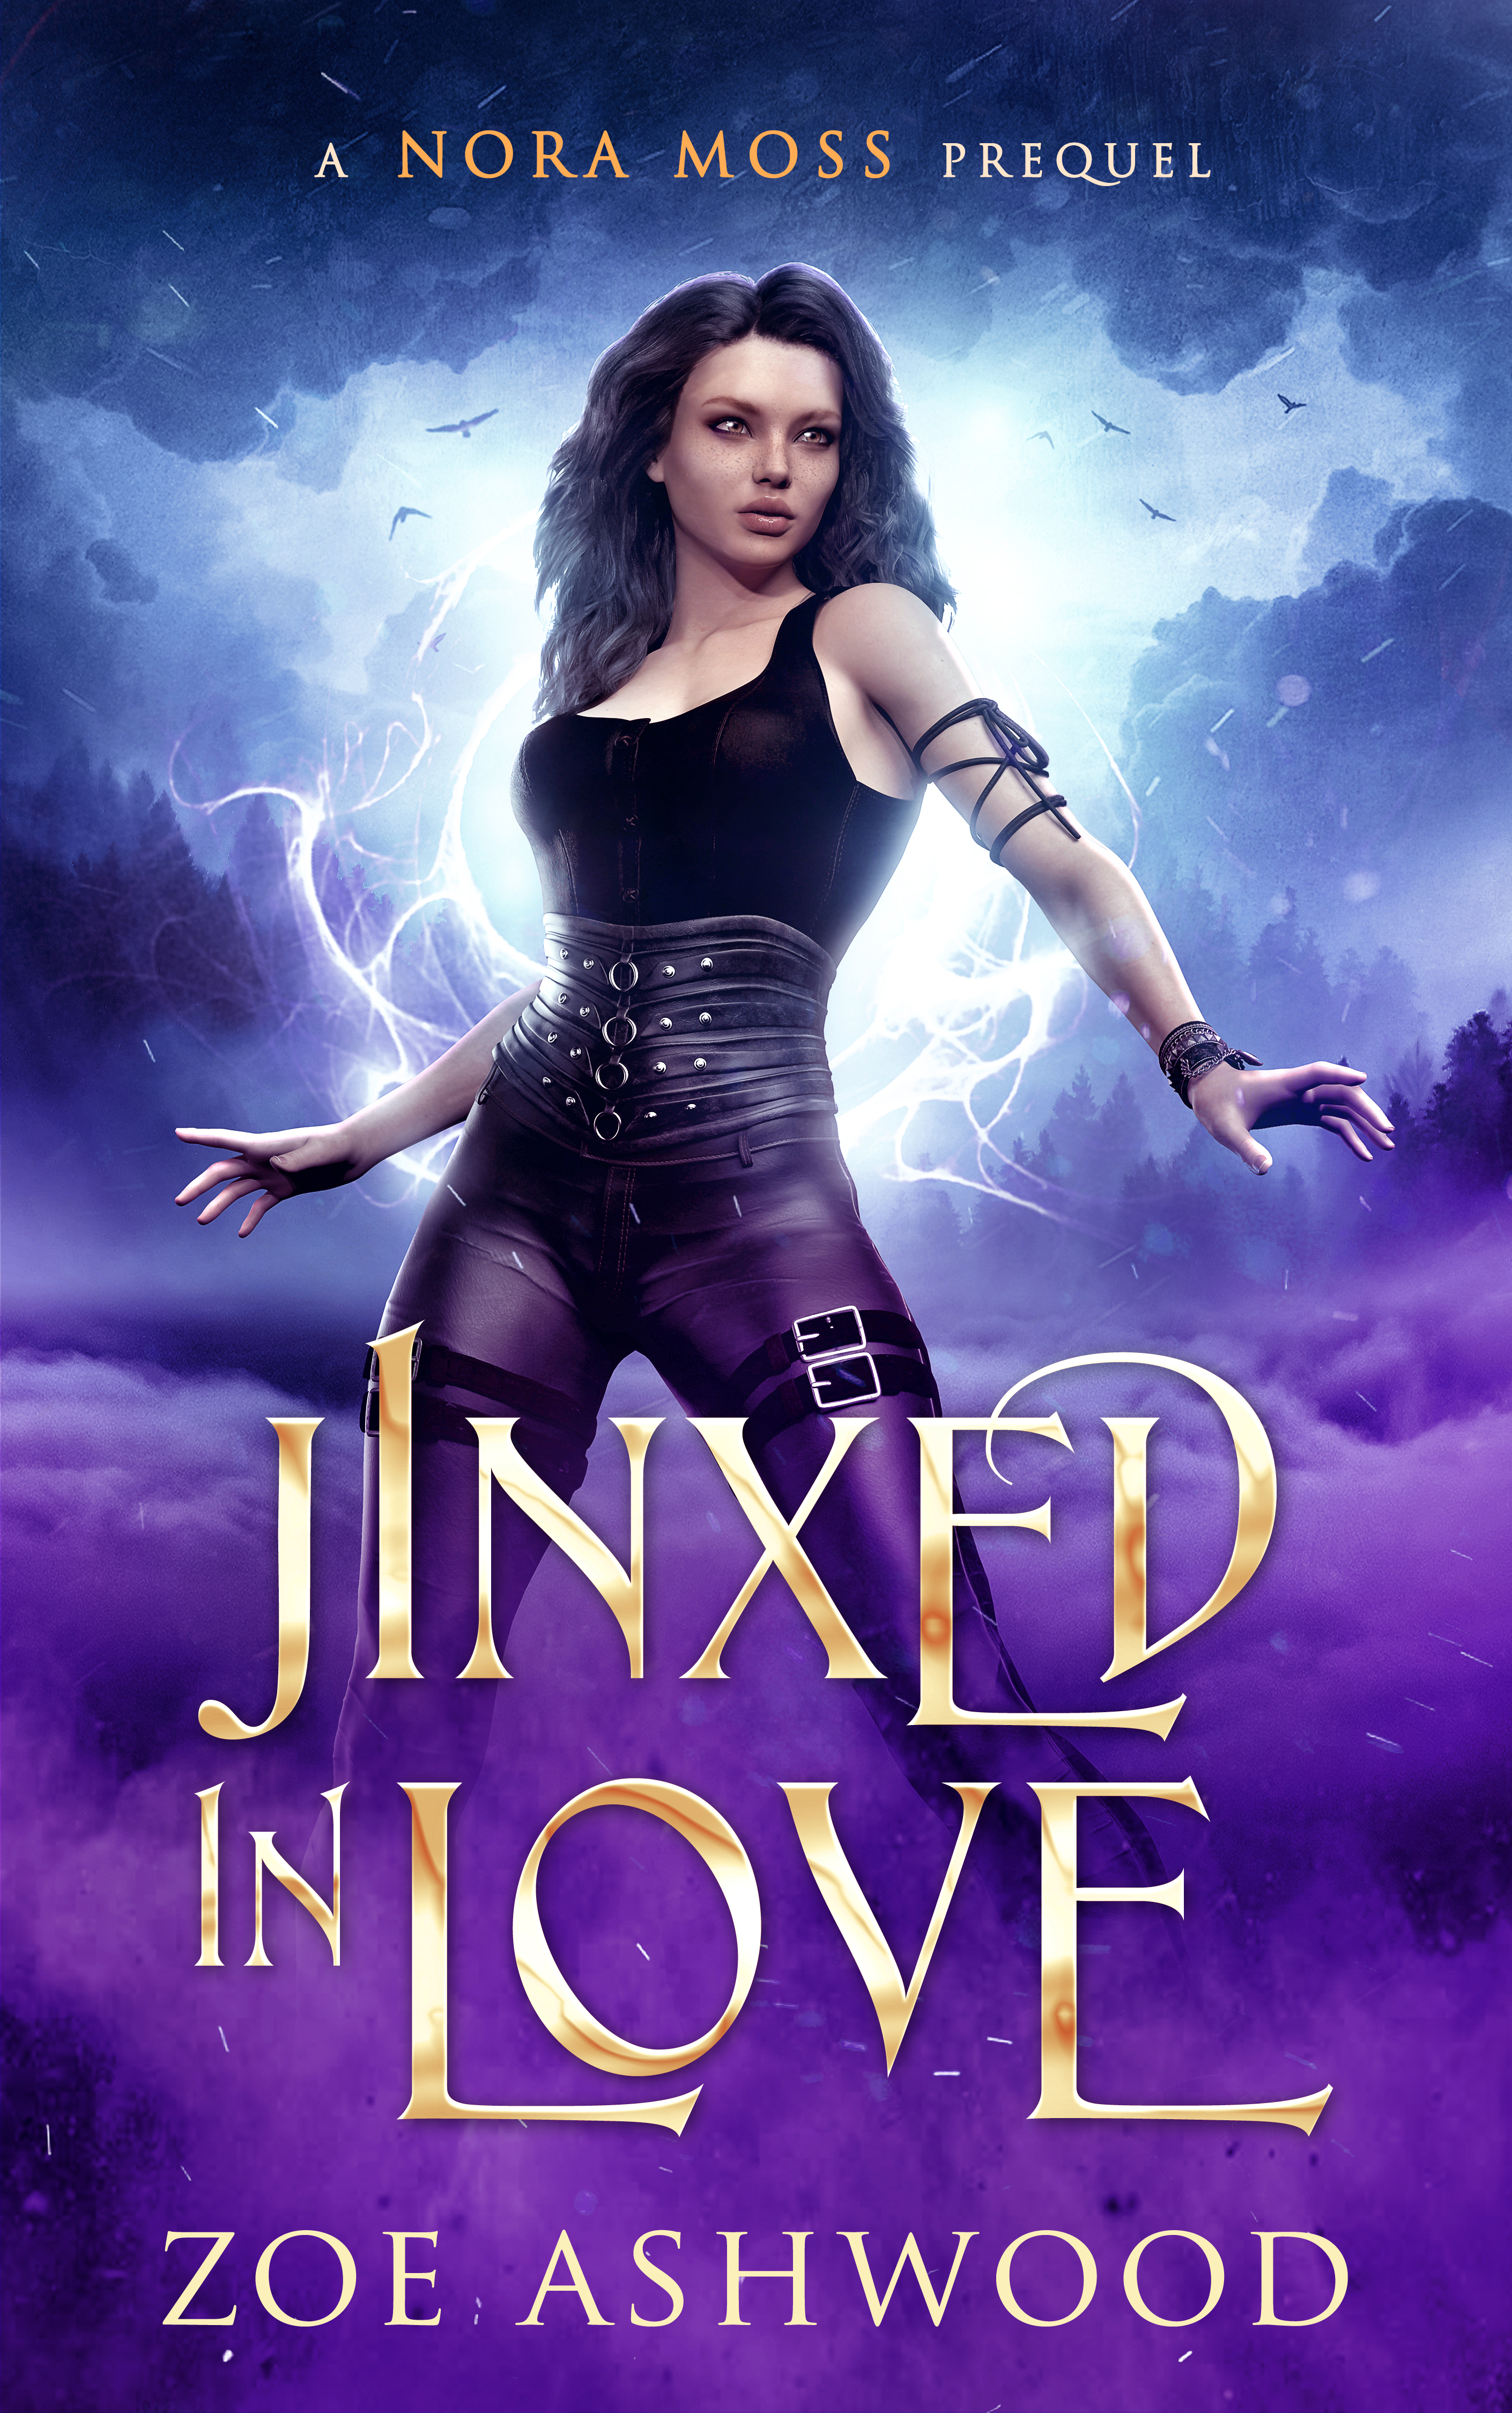 Jinxed in Love by Zoe Ashwood - Nora Moss Prequel - reverse harem paranormal romance 